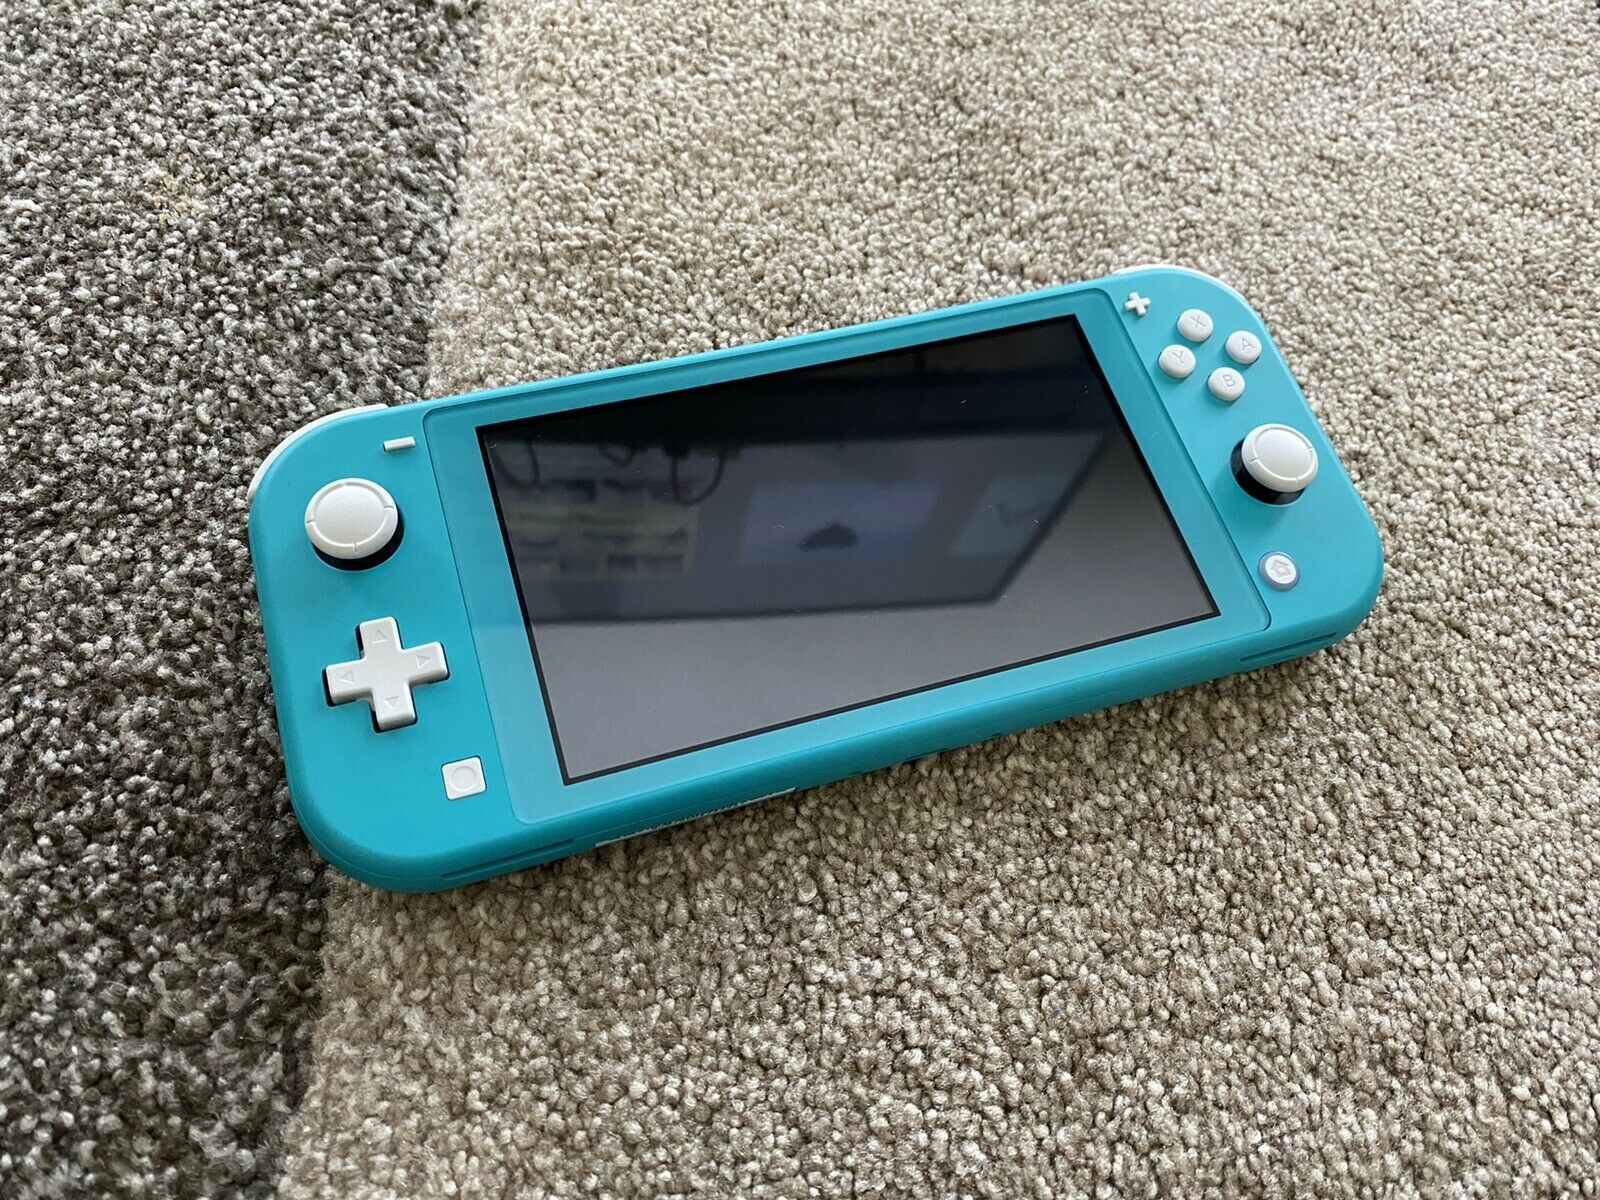 Nintendo Switch Lite - Turquoise - Unbelievable Situation! - iCommerce